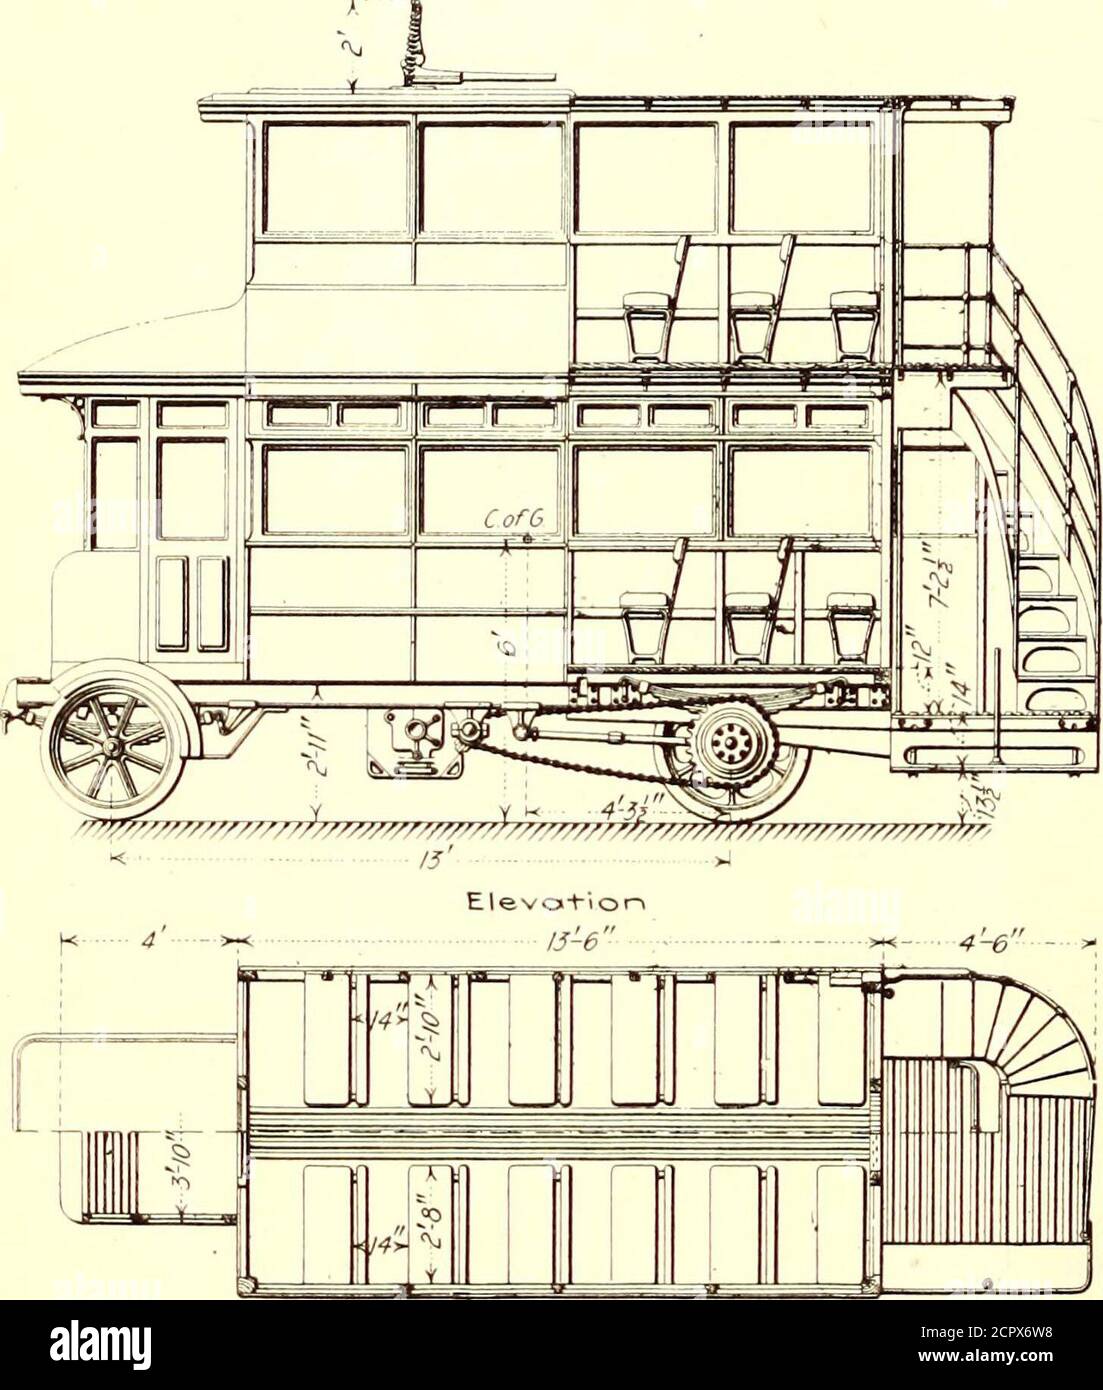 . Electric railway journal . ackless trolleyservice by the Bradford Corporation Tramways arearranged in accordance with the standard system of trolley, on the other hand, had to pay a road upkeepcharge of only 0..374d. per vehicle-mile, whereas eachcar operated was assessed 1.289d. per car-mile forgeneral repairs and maintenance of permanent way.In this last instance the trackless trolley has to payapproximately half as much per seat as the car. From a vehicle maintenance standpoint, the car hadthe better of the comparison, averaging 2.678d. per mileagainst 3.201d. per mile against the newer a Stock Photo